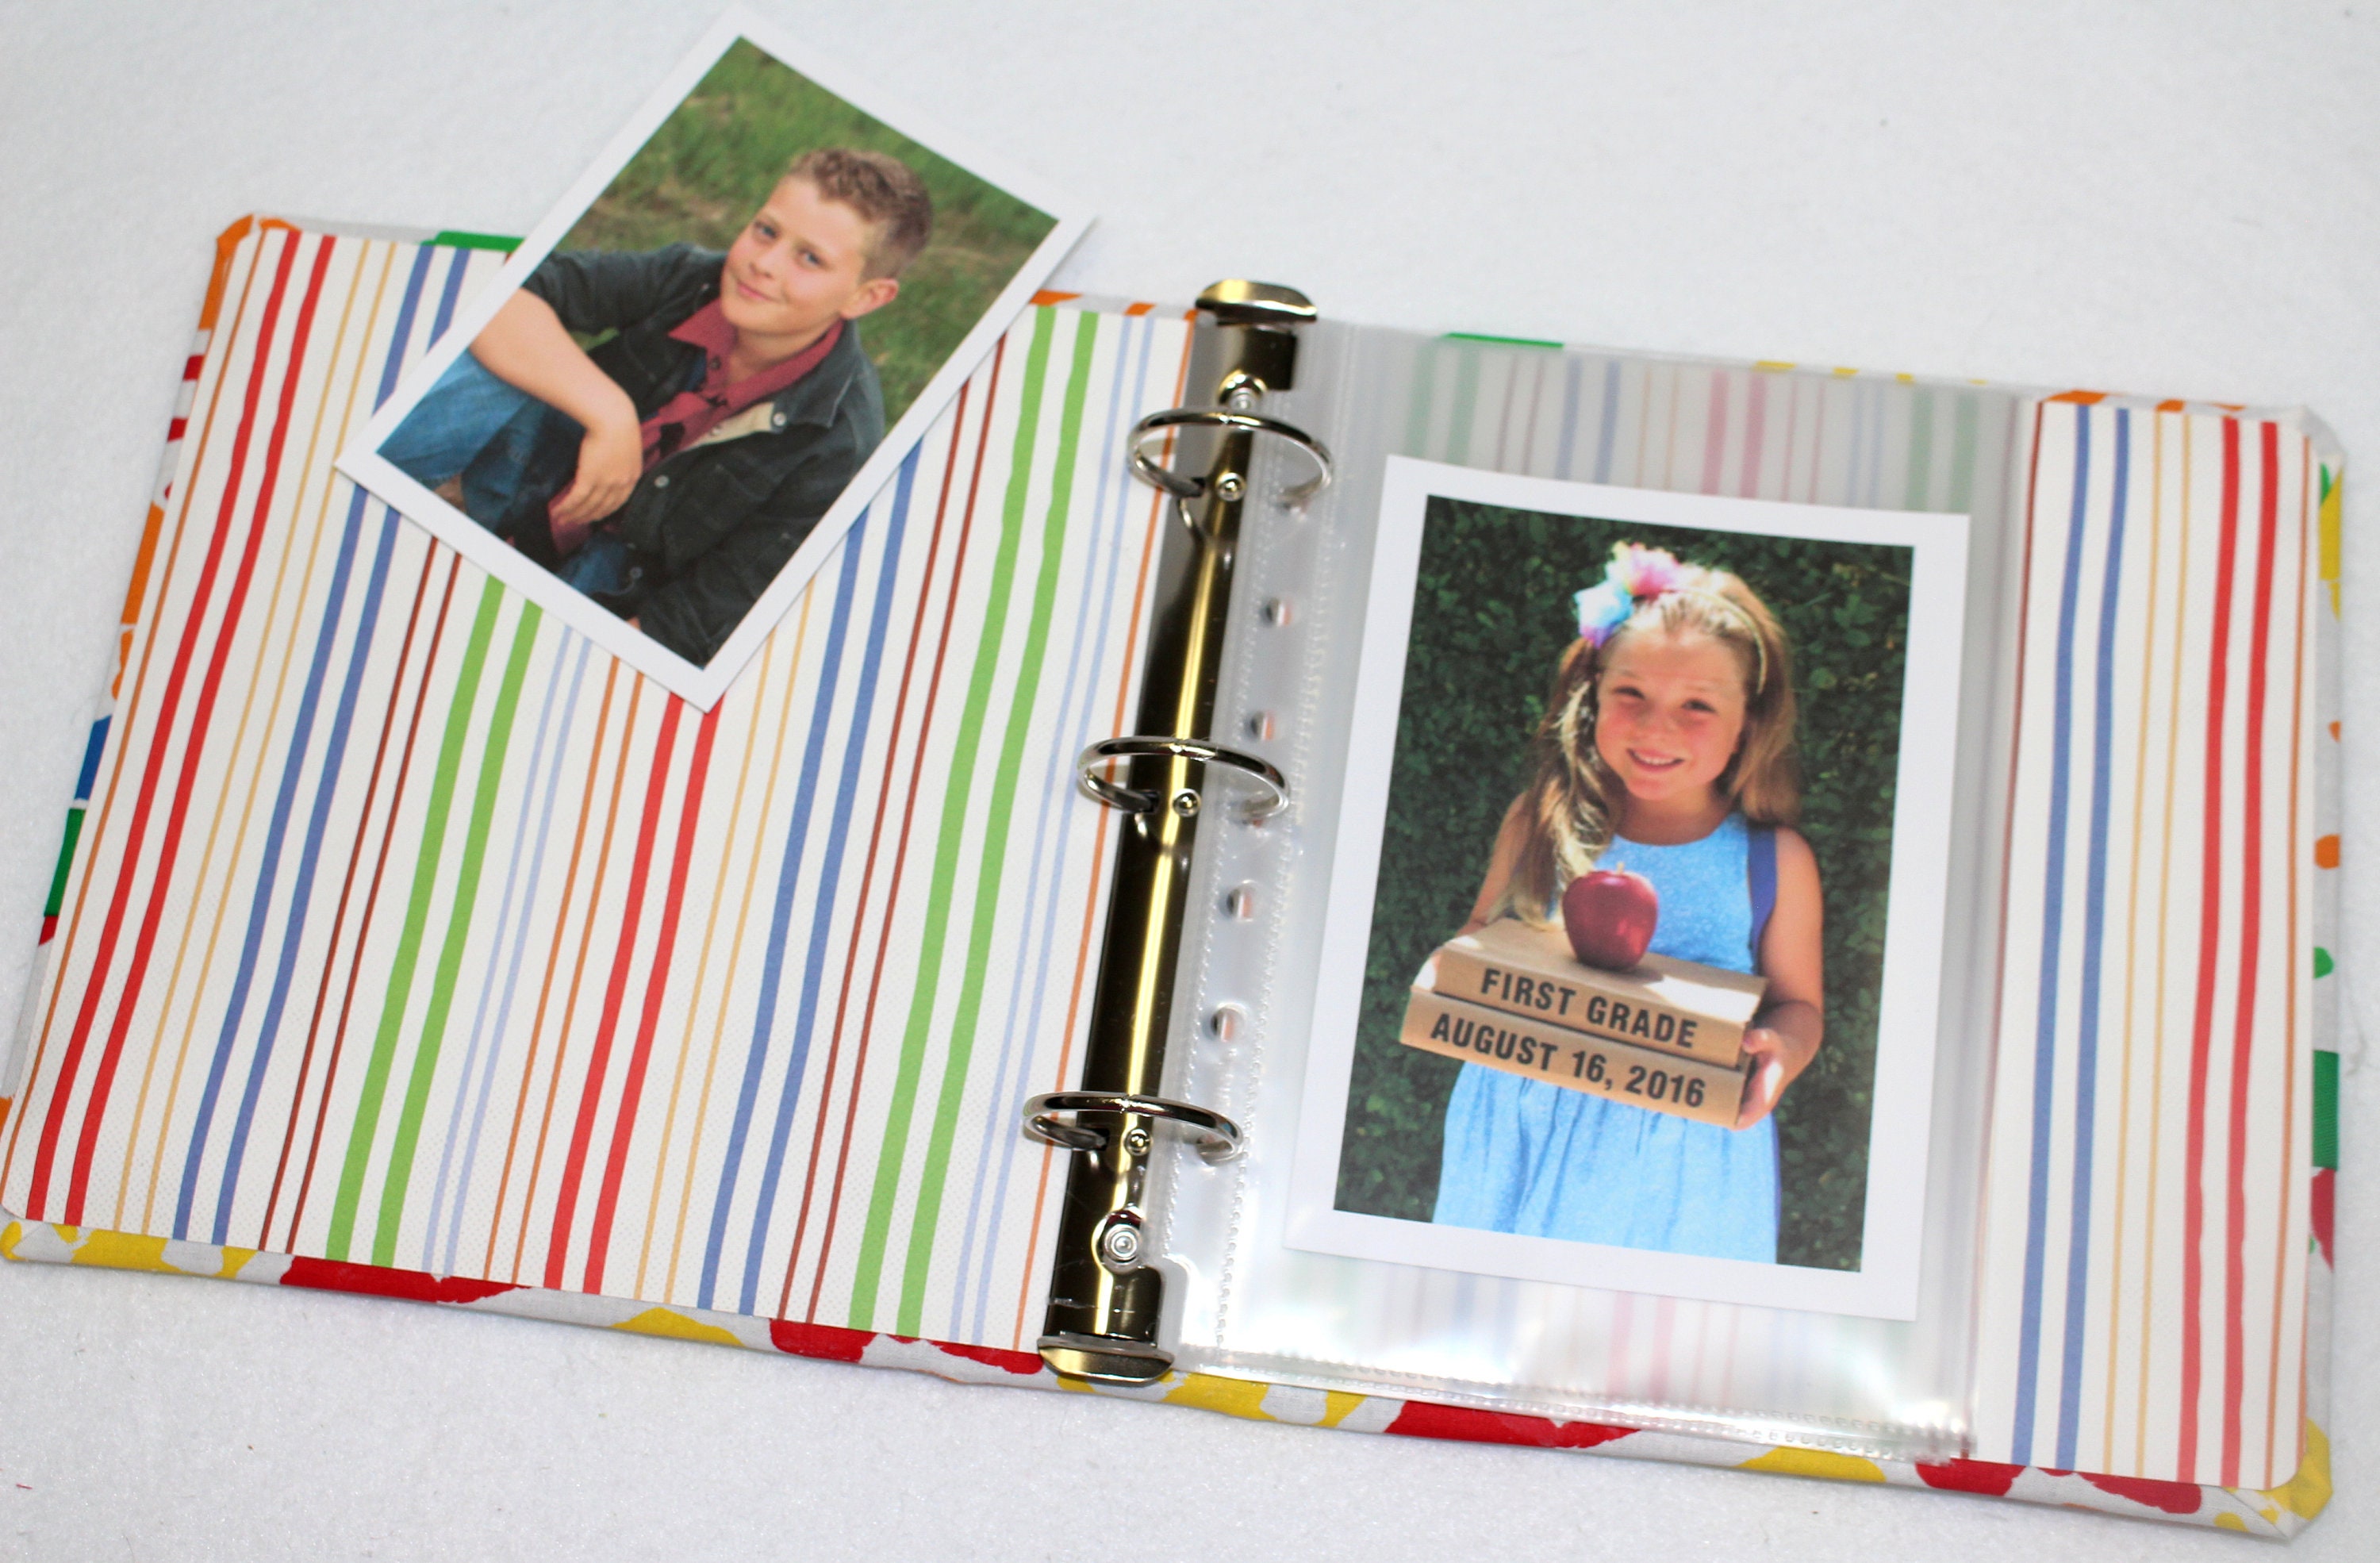 3 Ring Binder, Personalized Binder, Coral and Pink Flowers, Boho